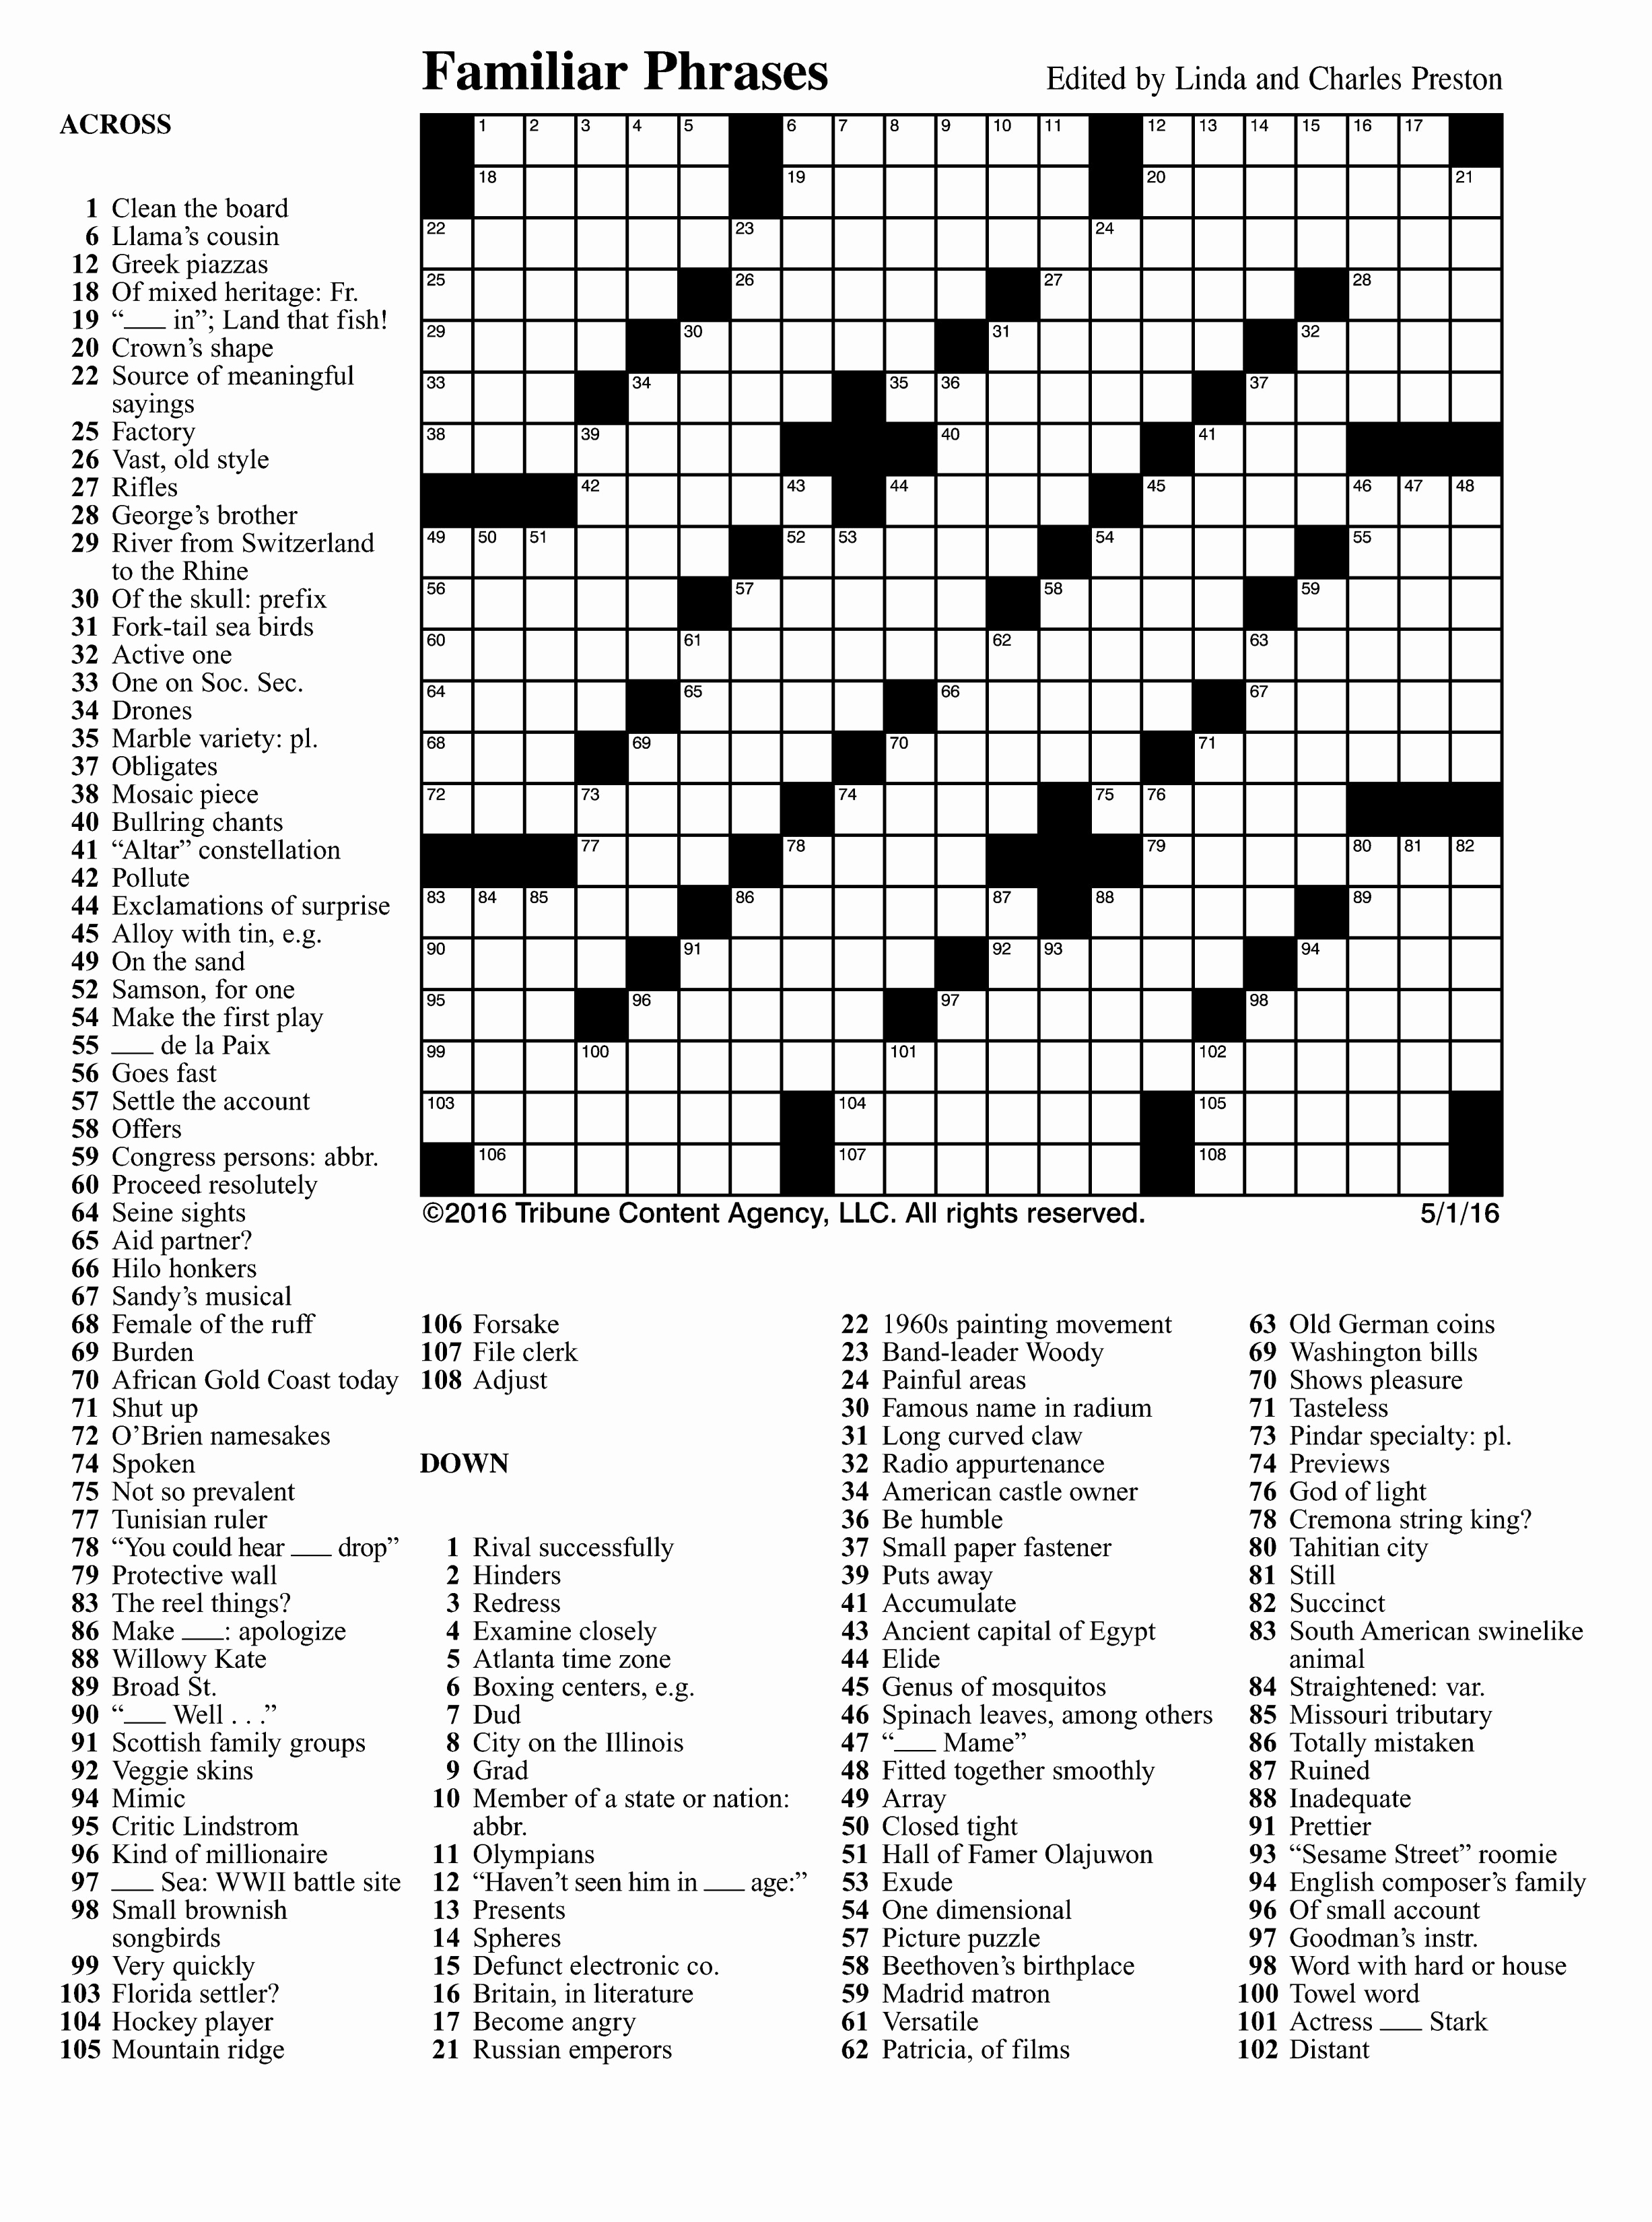 Free Printable Crossword Puzzles For Kids - Yapis.sticken.co - Printable Puzzles For Adults